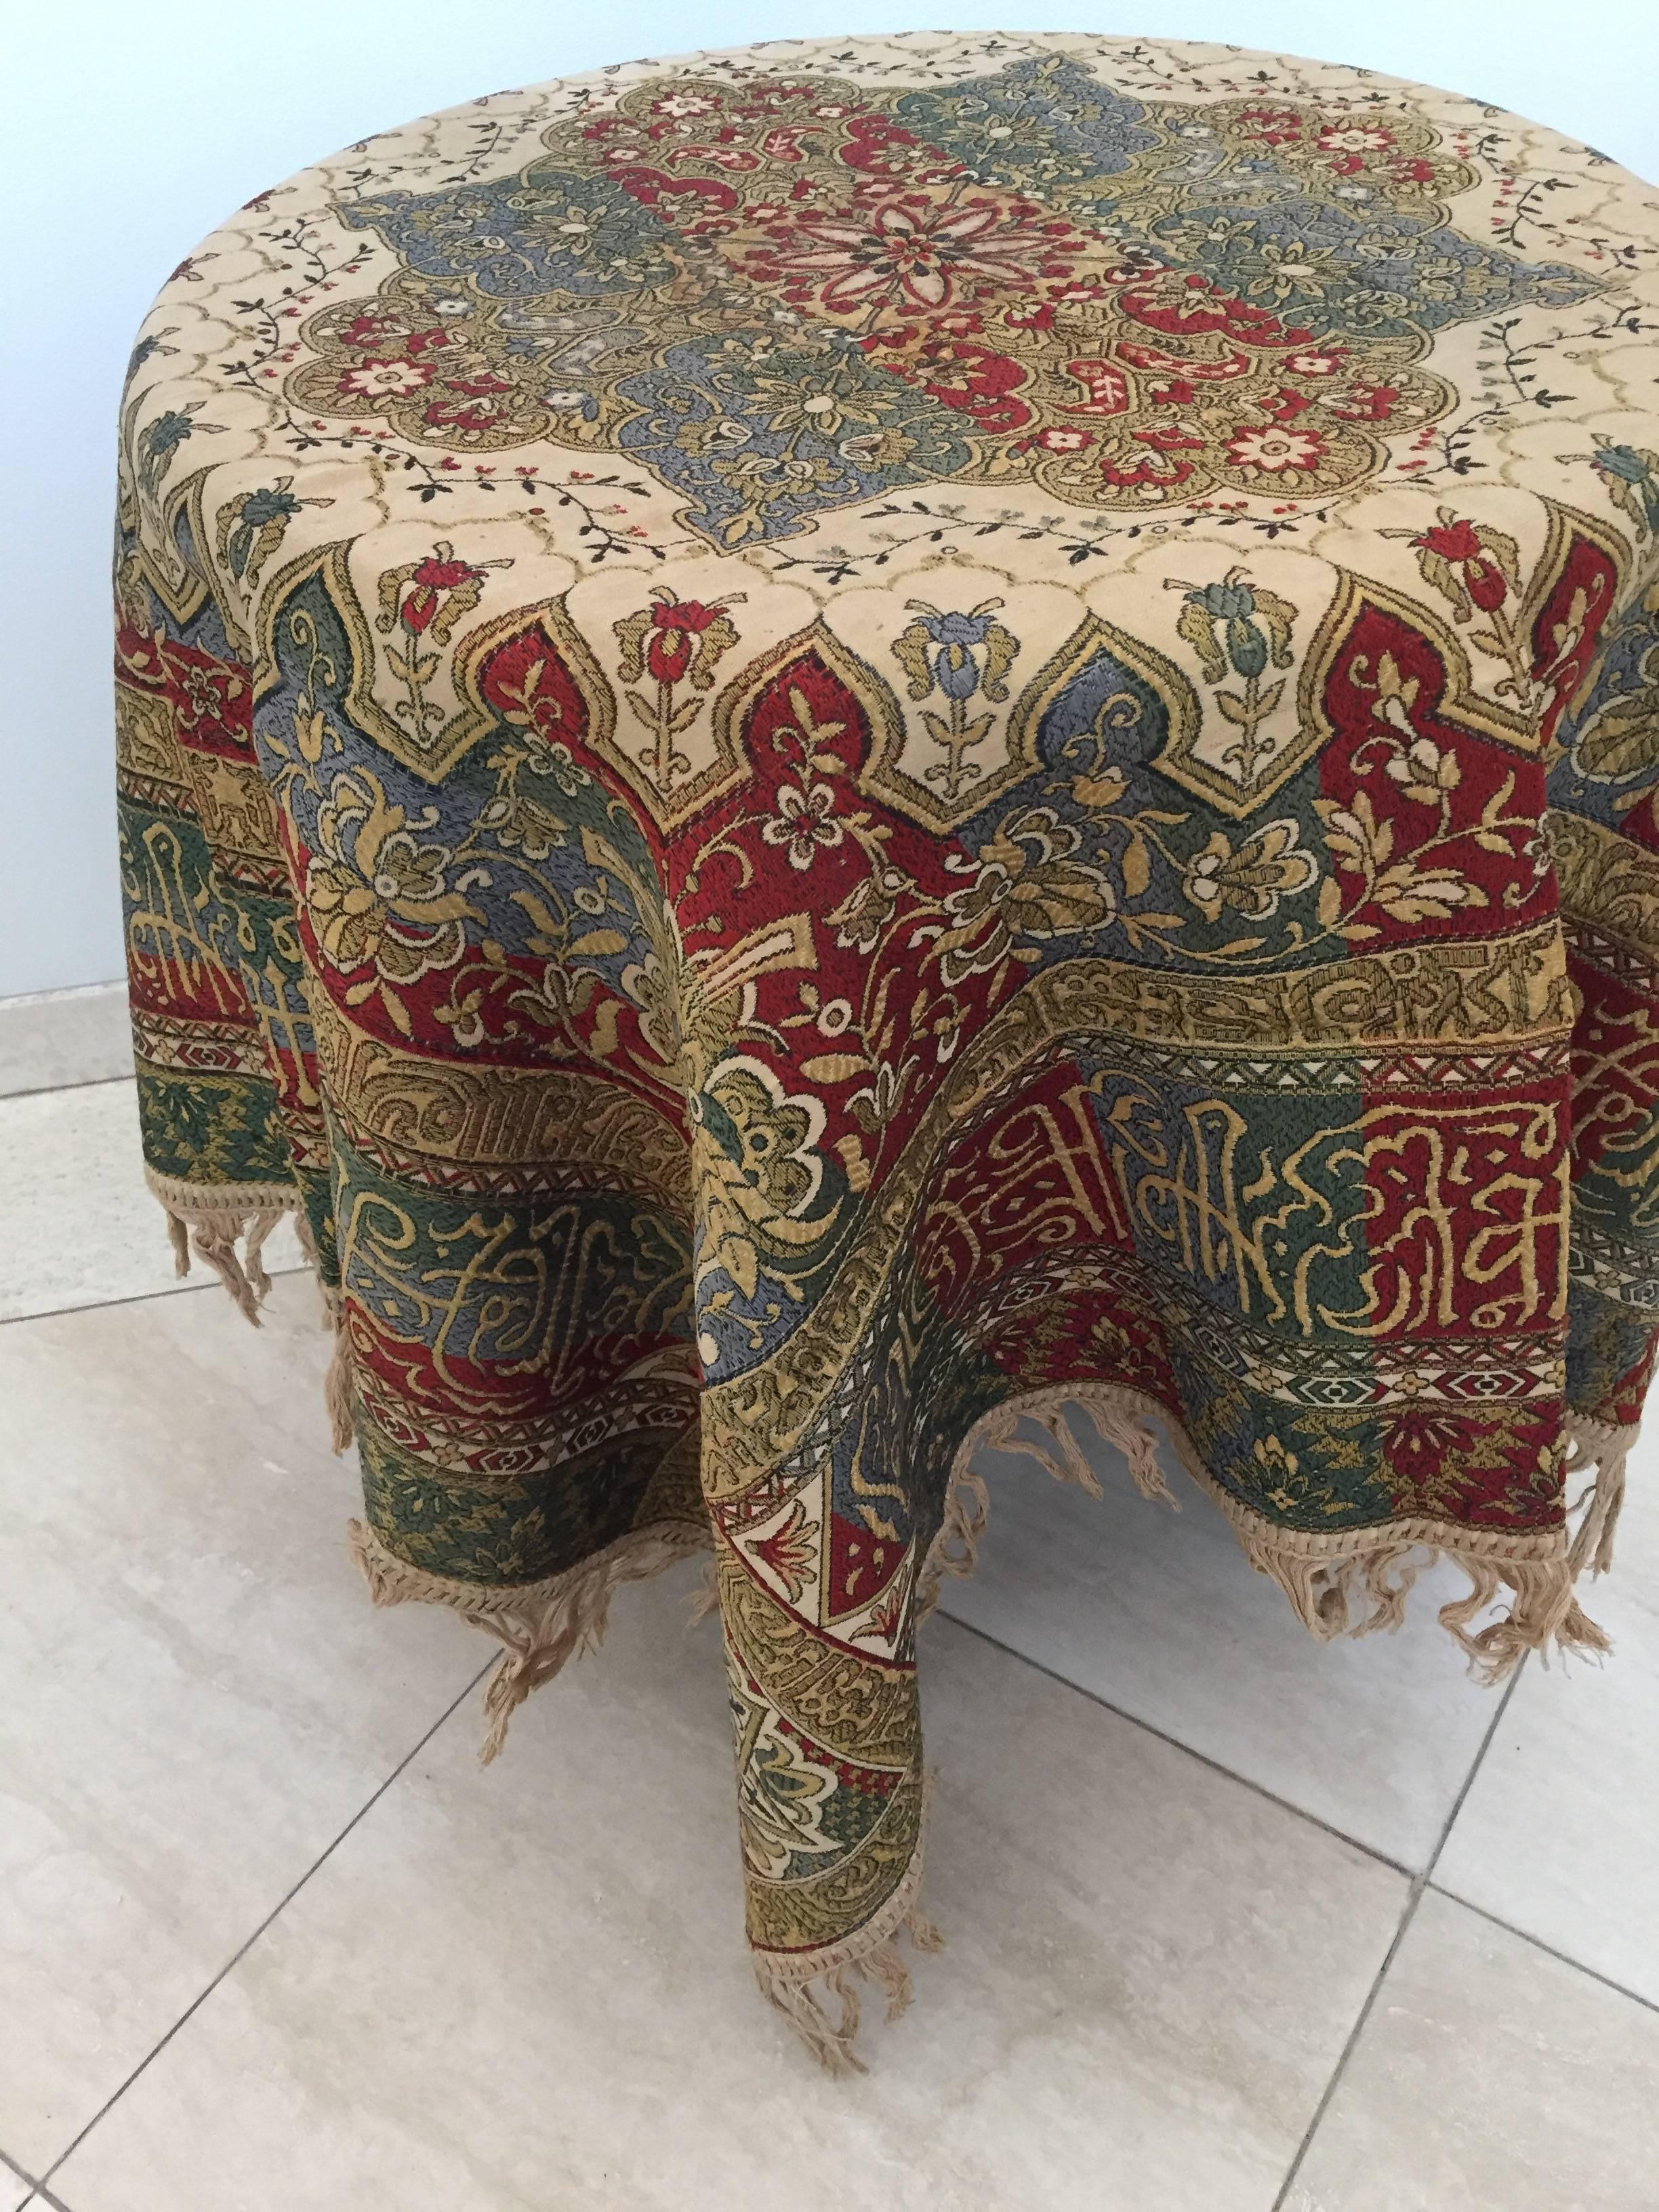 Granada, Islamic Spain, great square textile with ivory color fringes featuring Moorish floral designs and calligraphy Arabic writing.
Colors are earth tone in green, ivory and deep Moroccan red.
Could be used as a piano shawl, decorative Spanish